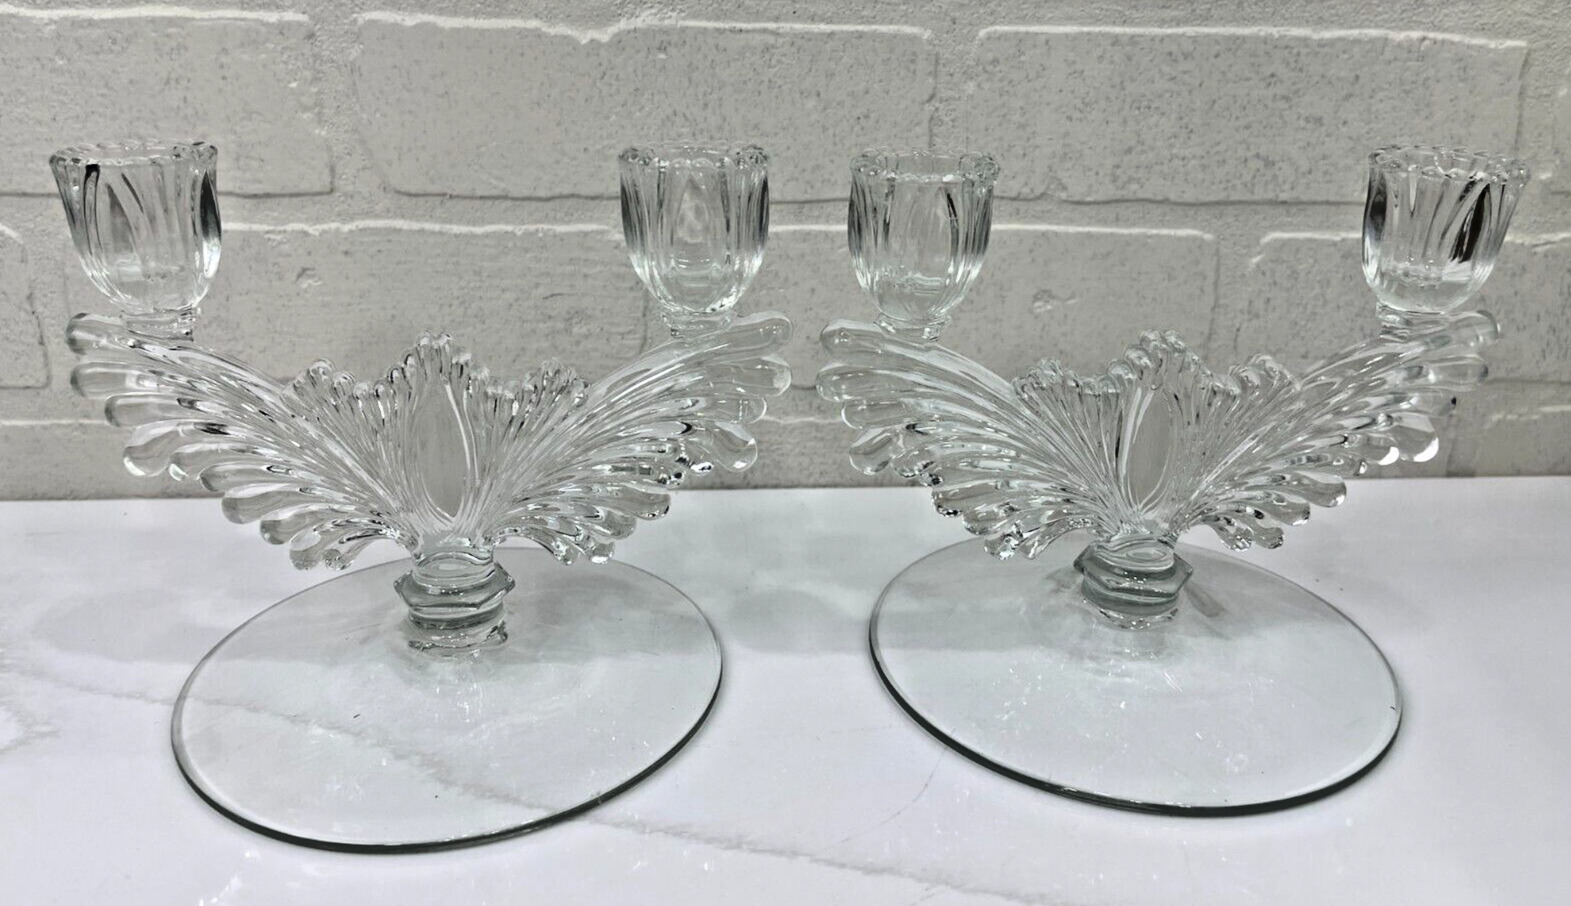 Pair of Elegant Art Deco Double Arm Candlestick Holders Clear glass Tablescape